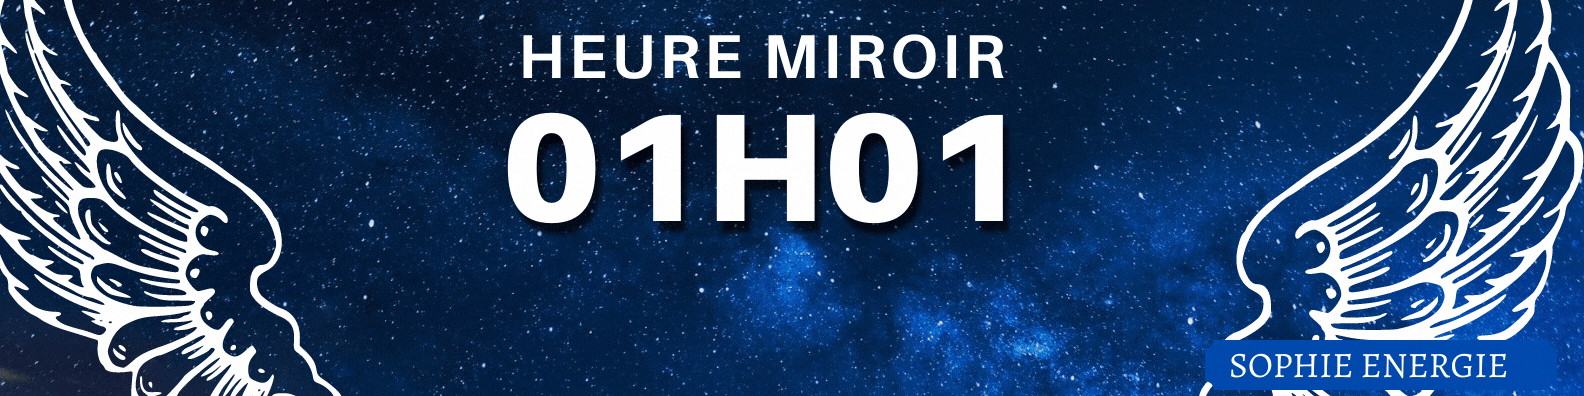 HEURE MIROIR anges 01h01